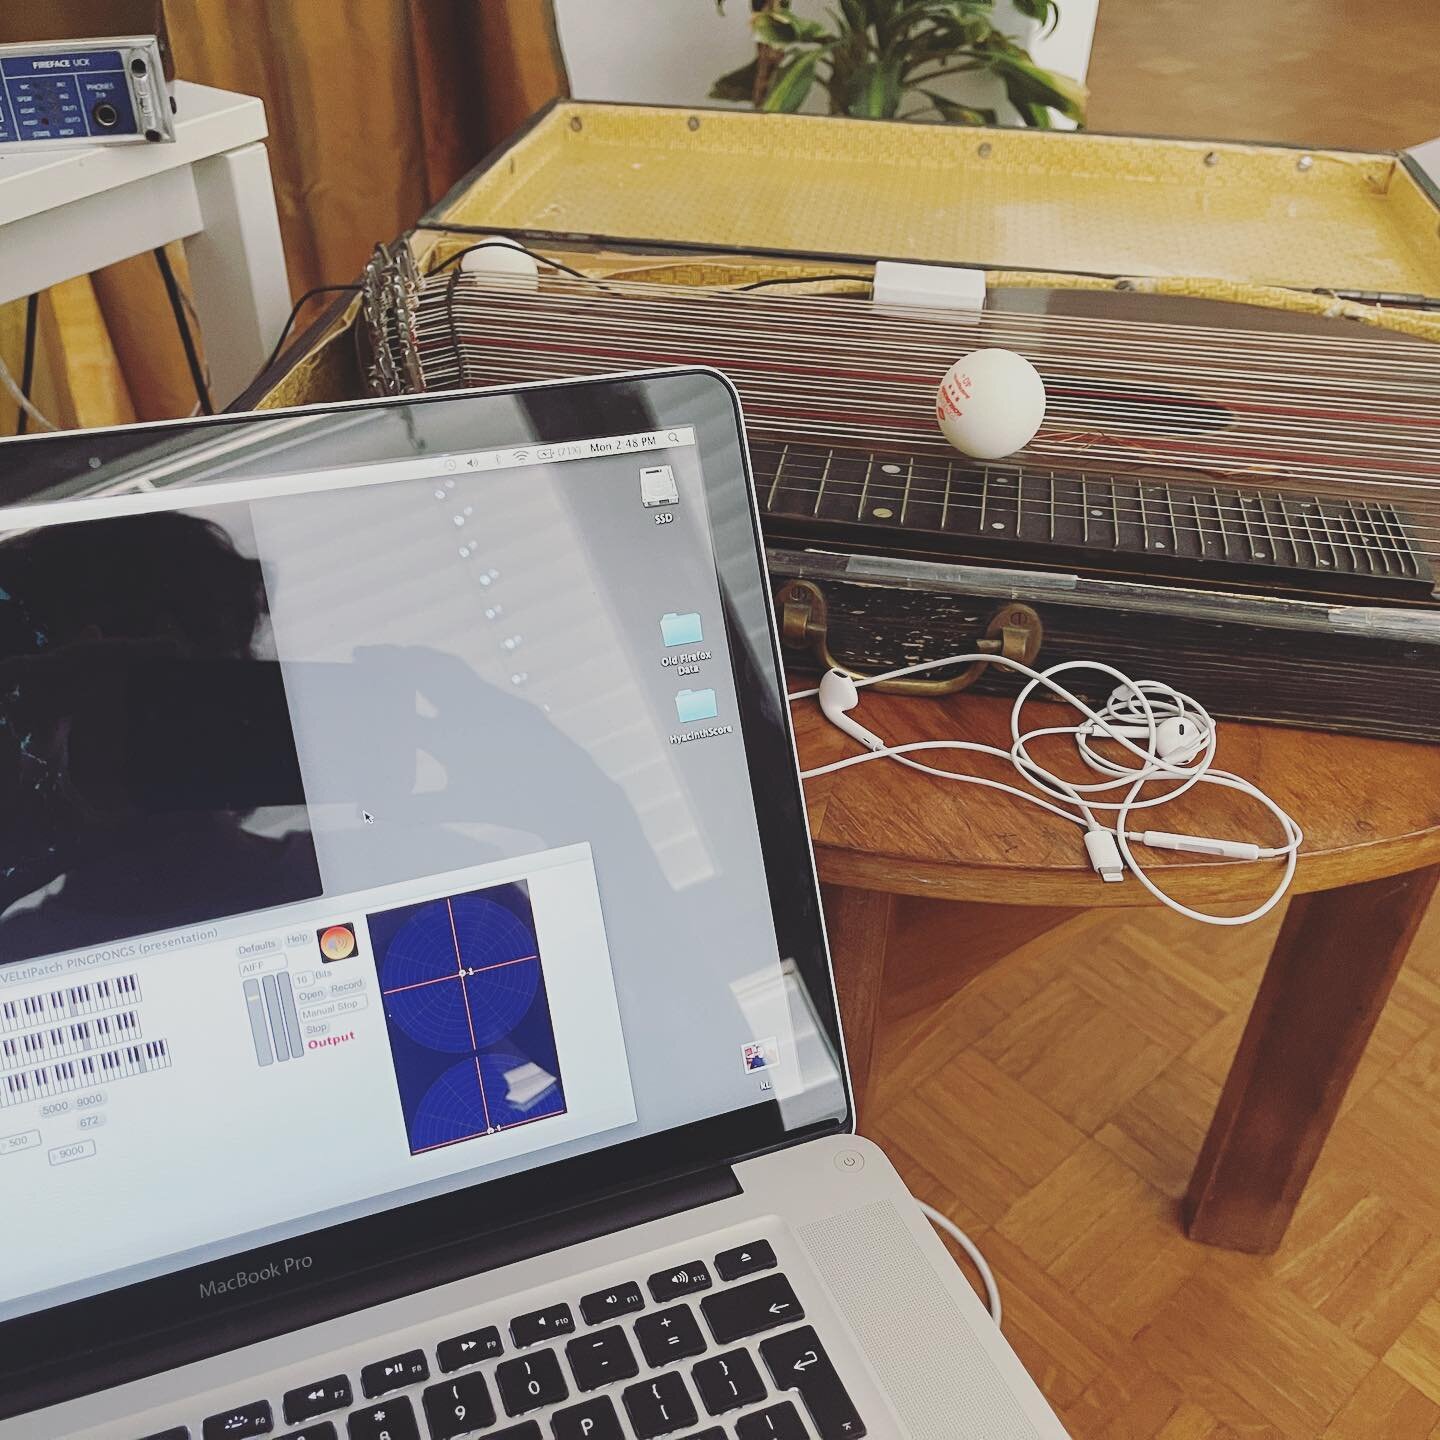 Ping Pong Ball on a beautiful old Zither, running via Max/Msp patch, testing out the &lsquo;orbit sound&rsquo; for our exhibition&mdash;